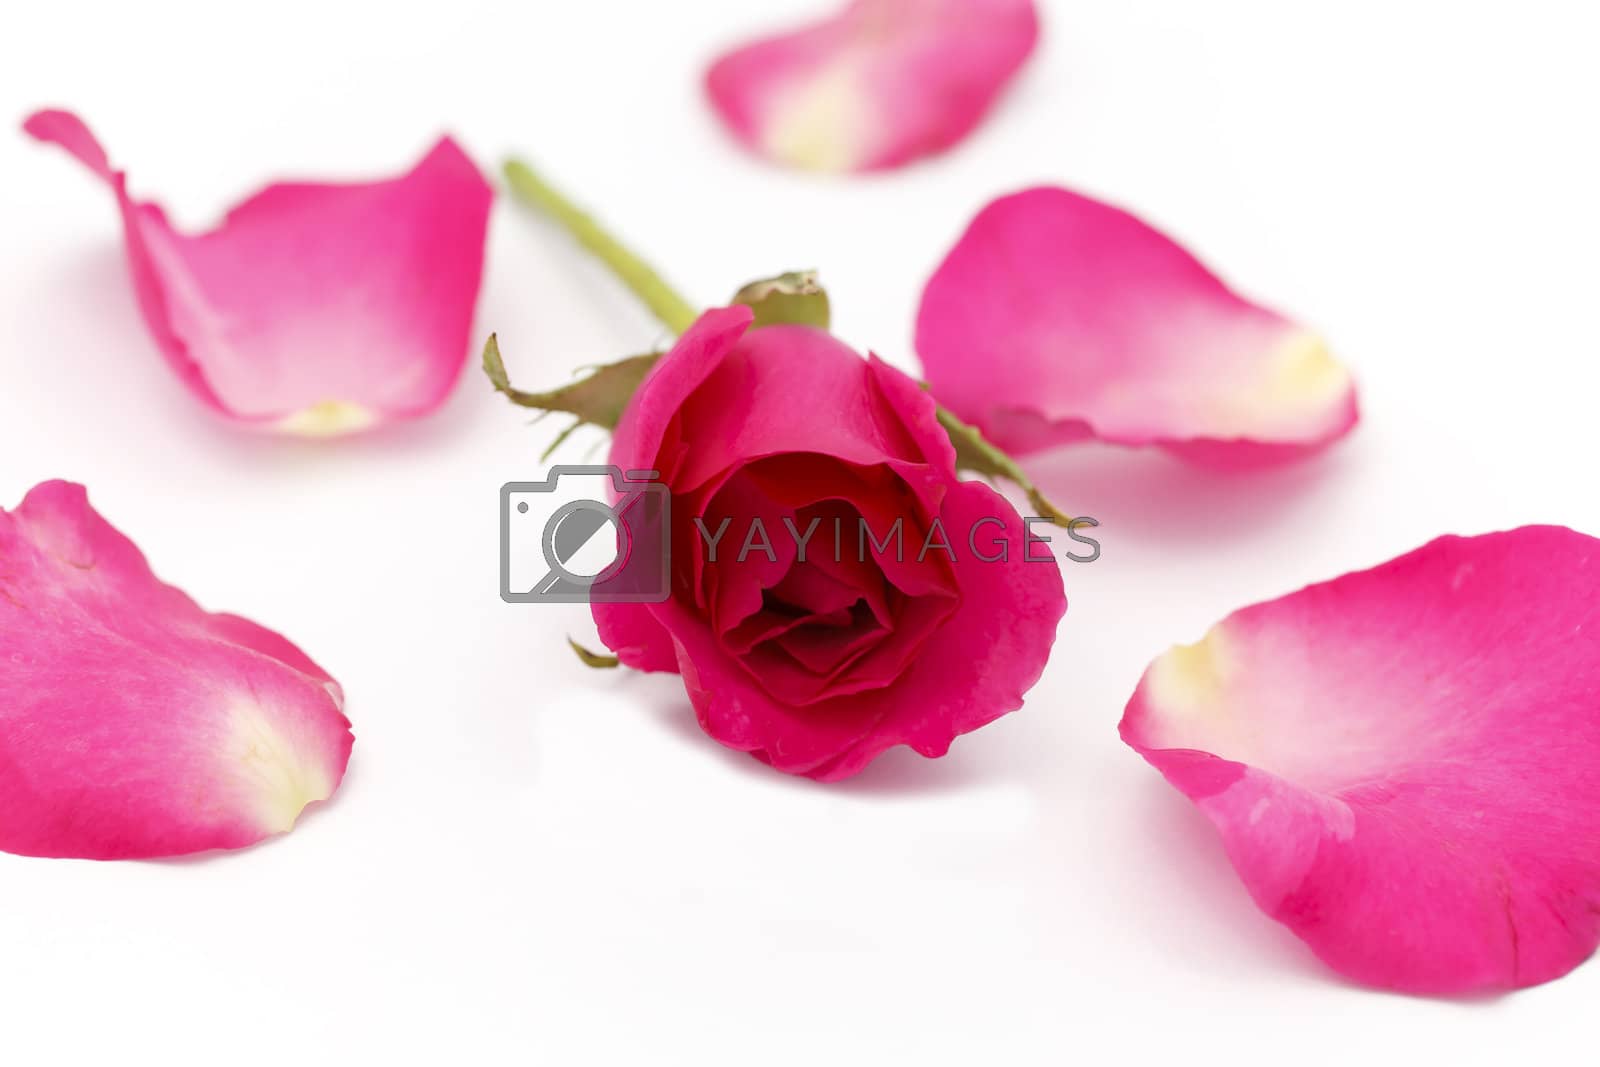 Royalty free image of Red Rose by jame_j@homail.com